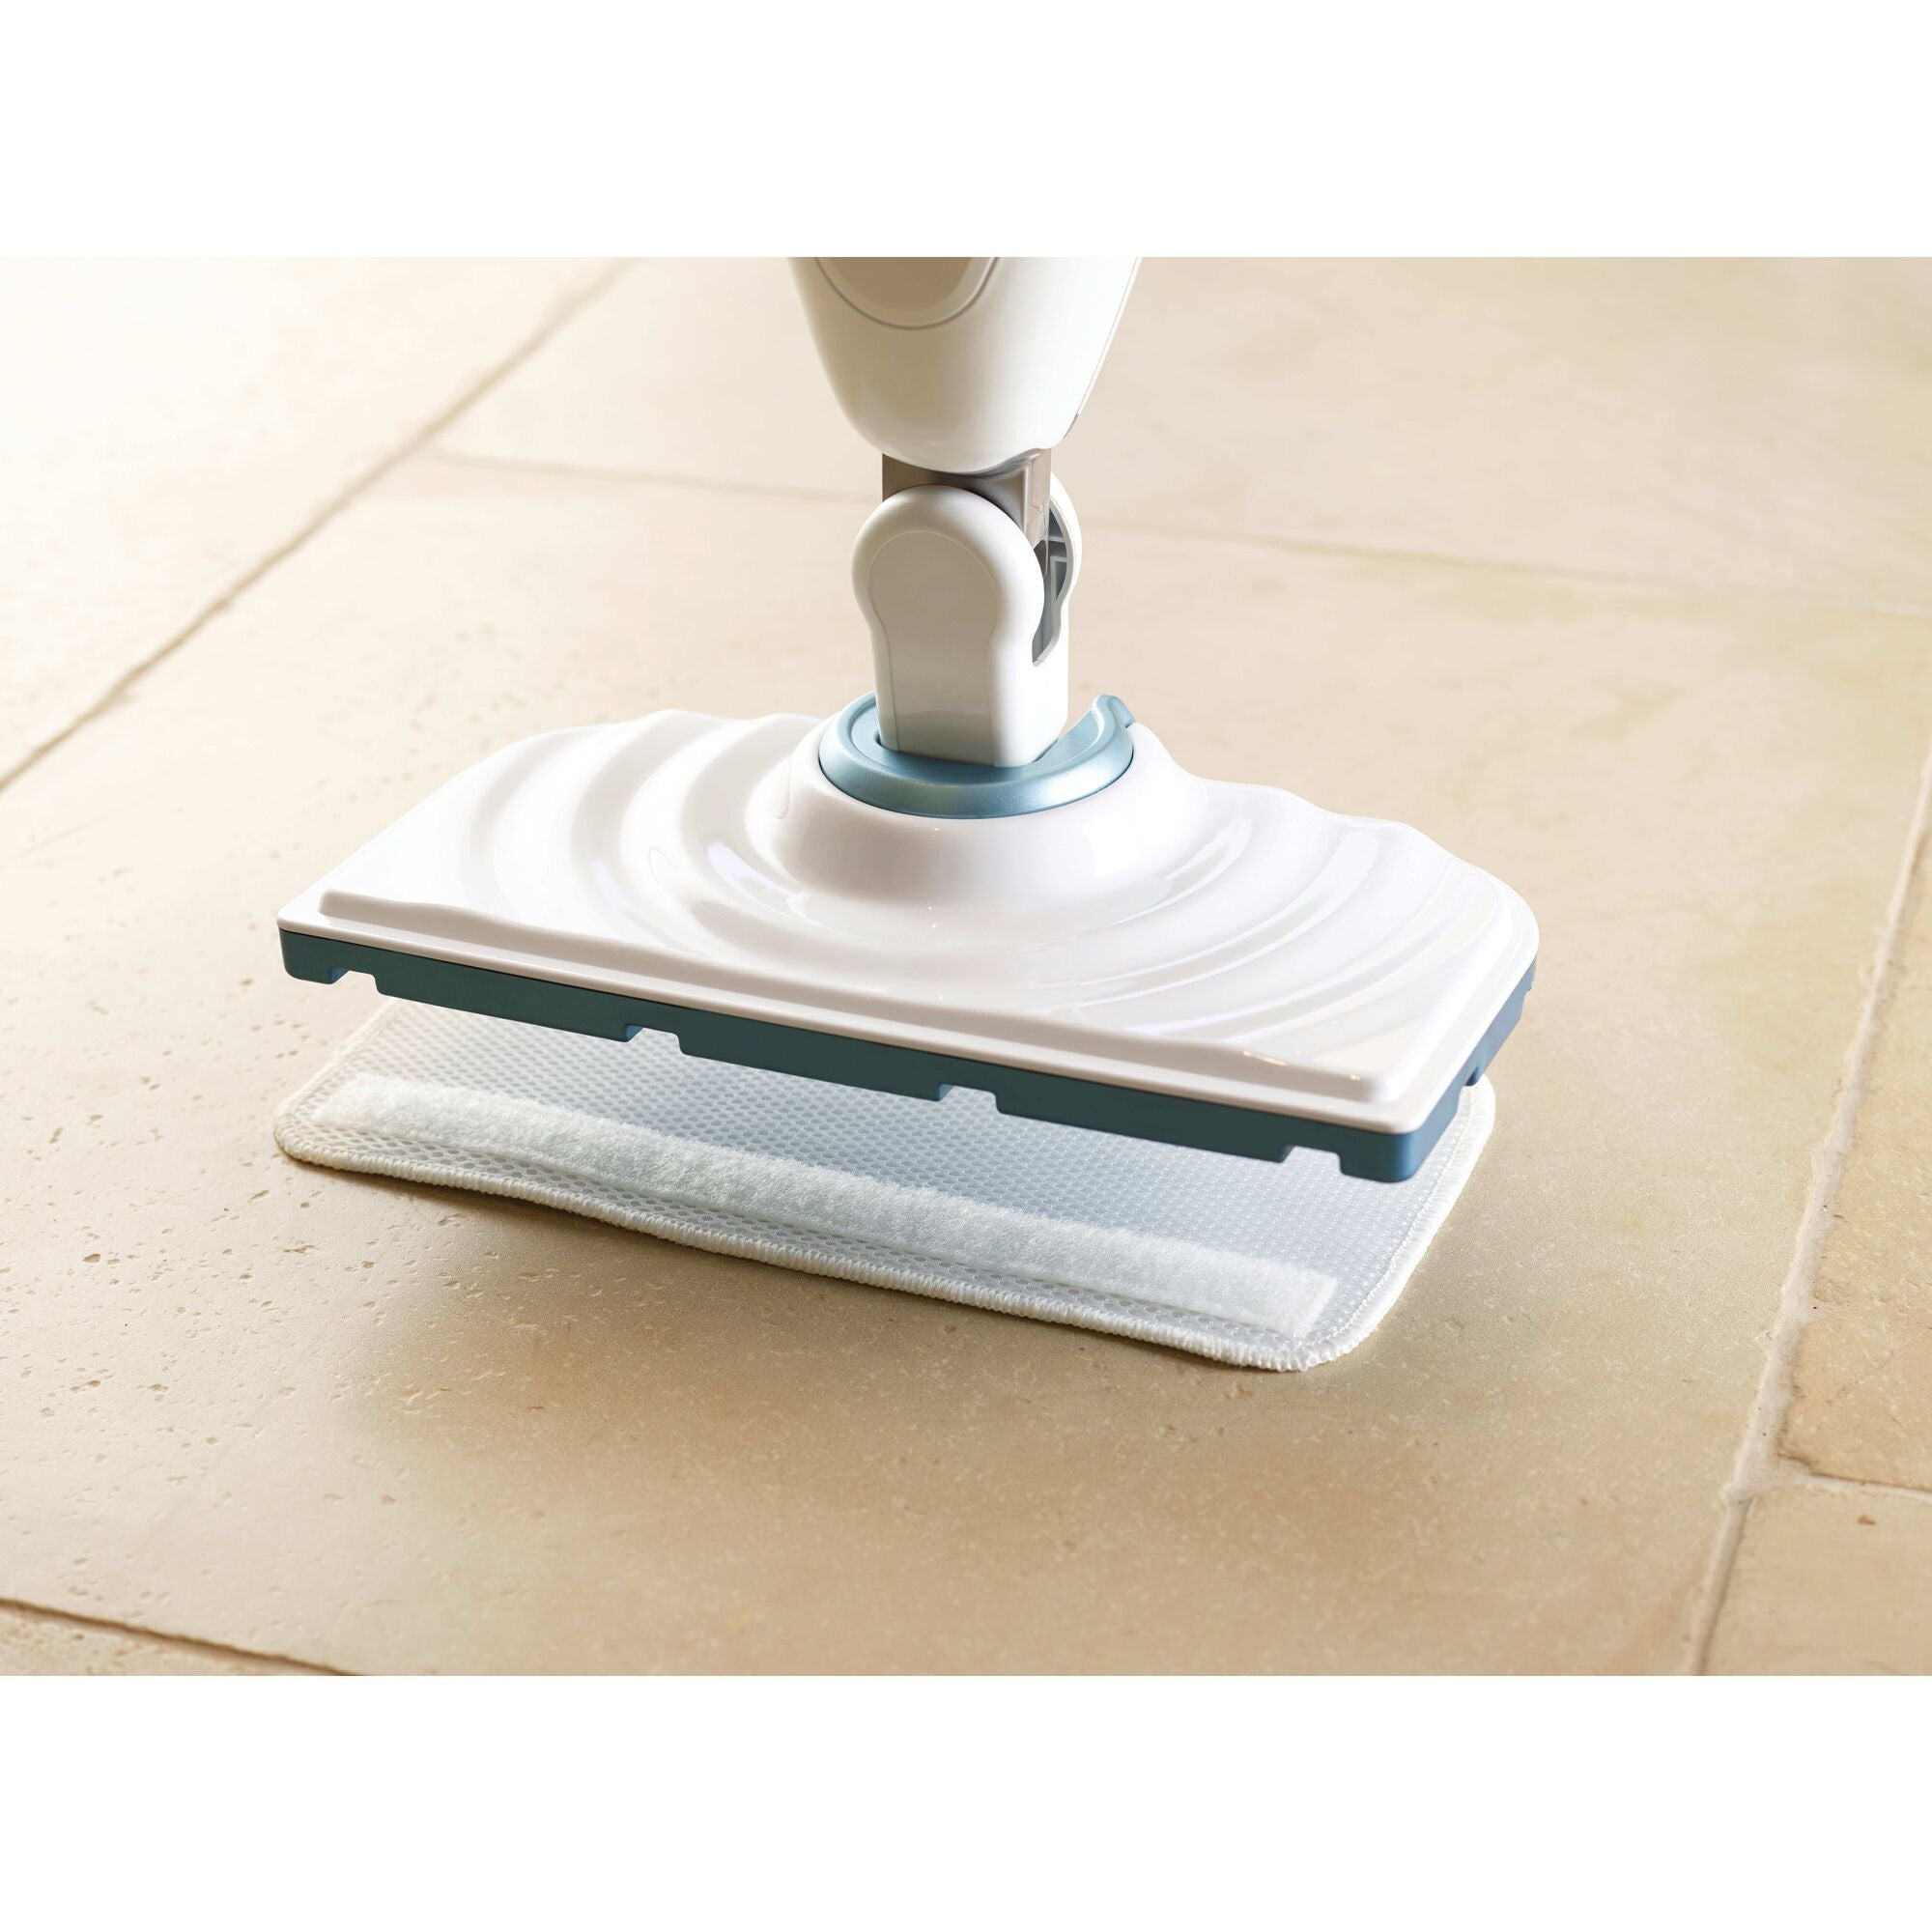 Easy glide micro fiber pad feature of Steam Mop with Lift plus Reach Head.